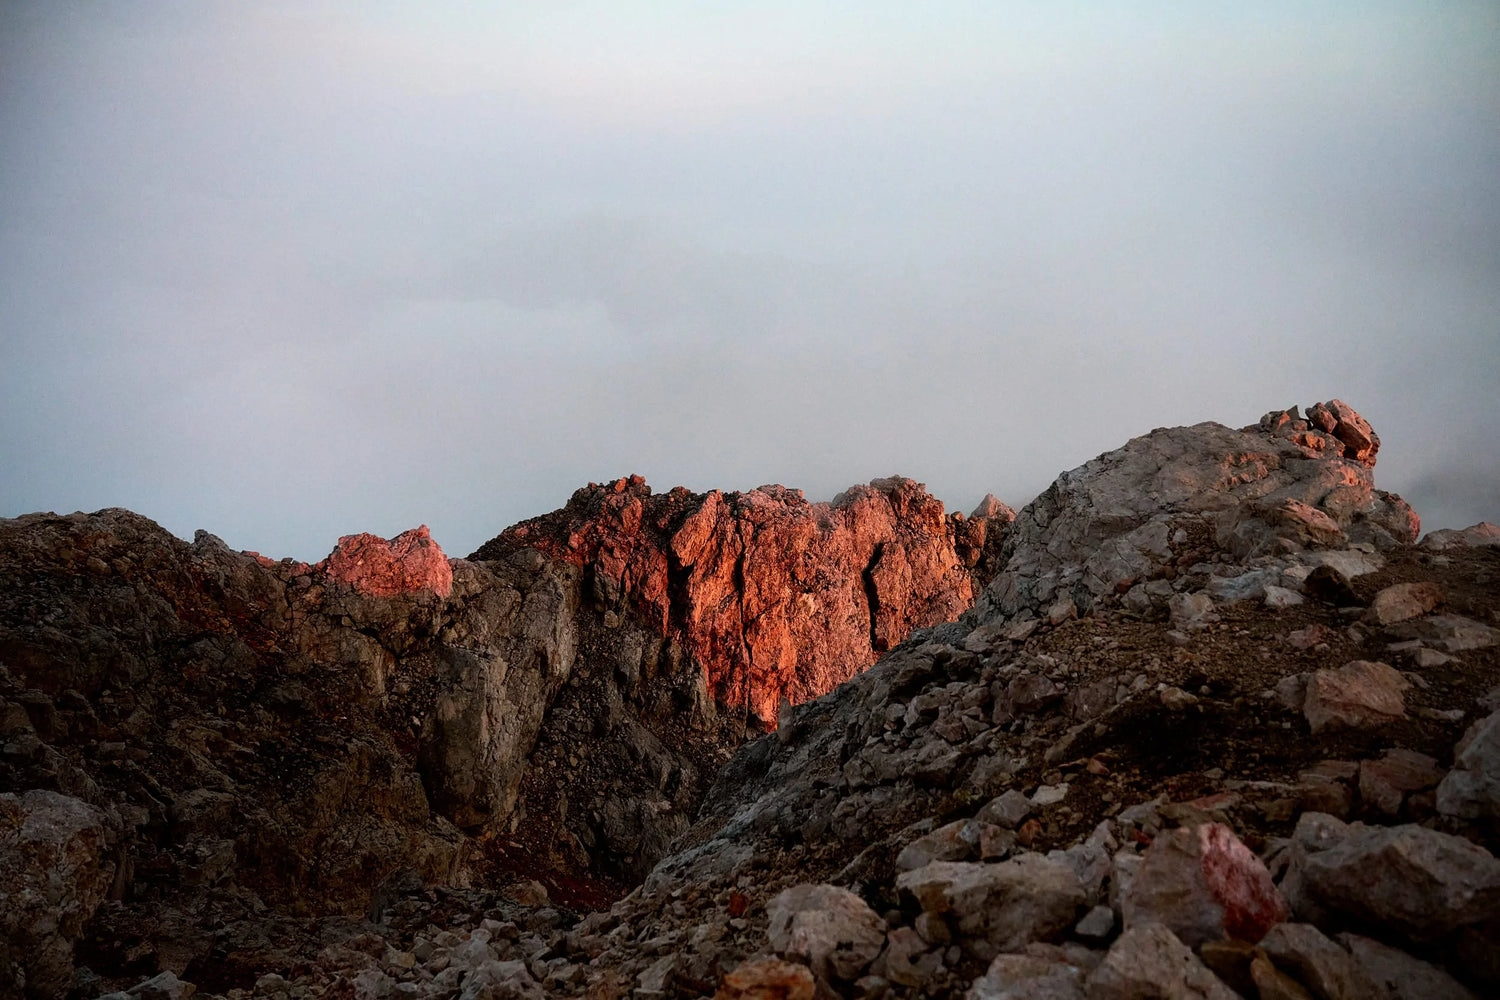 The artpiece 'At World's End' by Chris König shows a rocky landscape in the Julian Alps against a cloudy background.